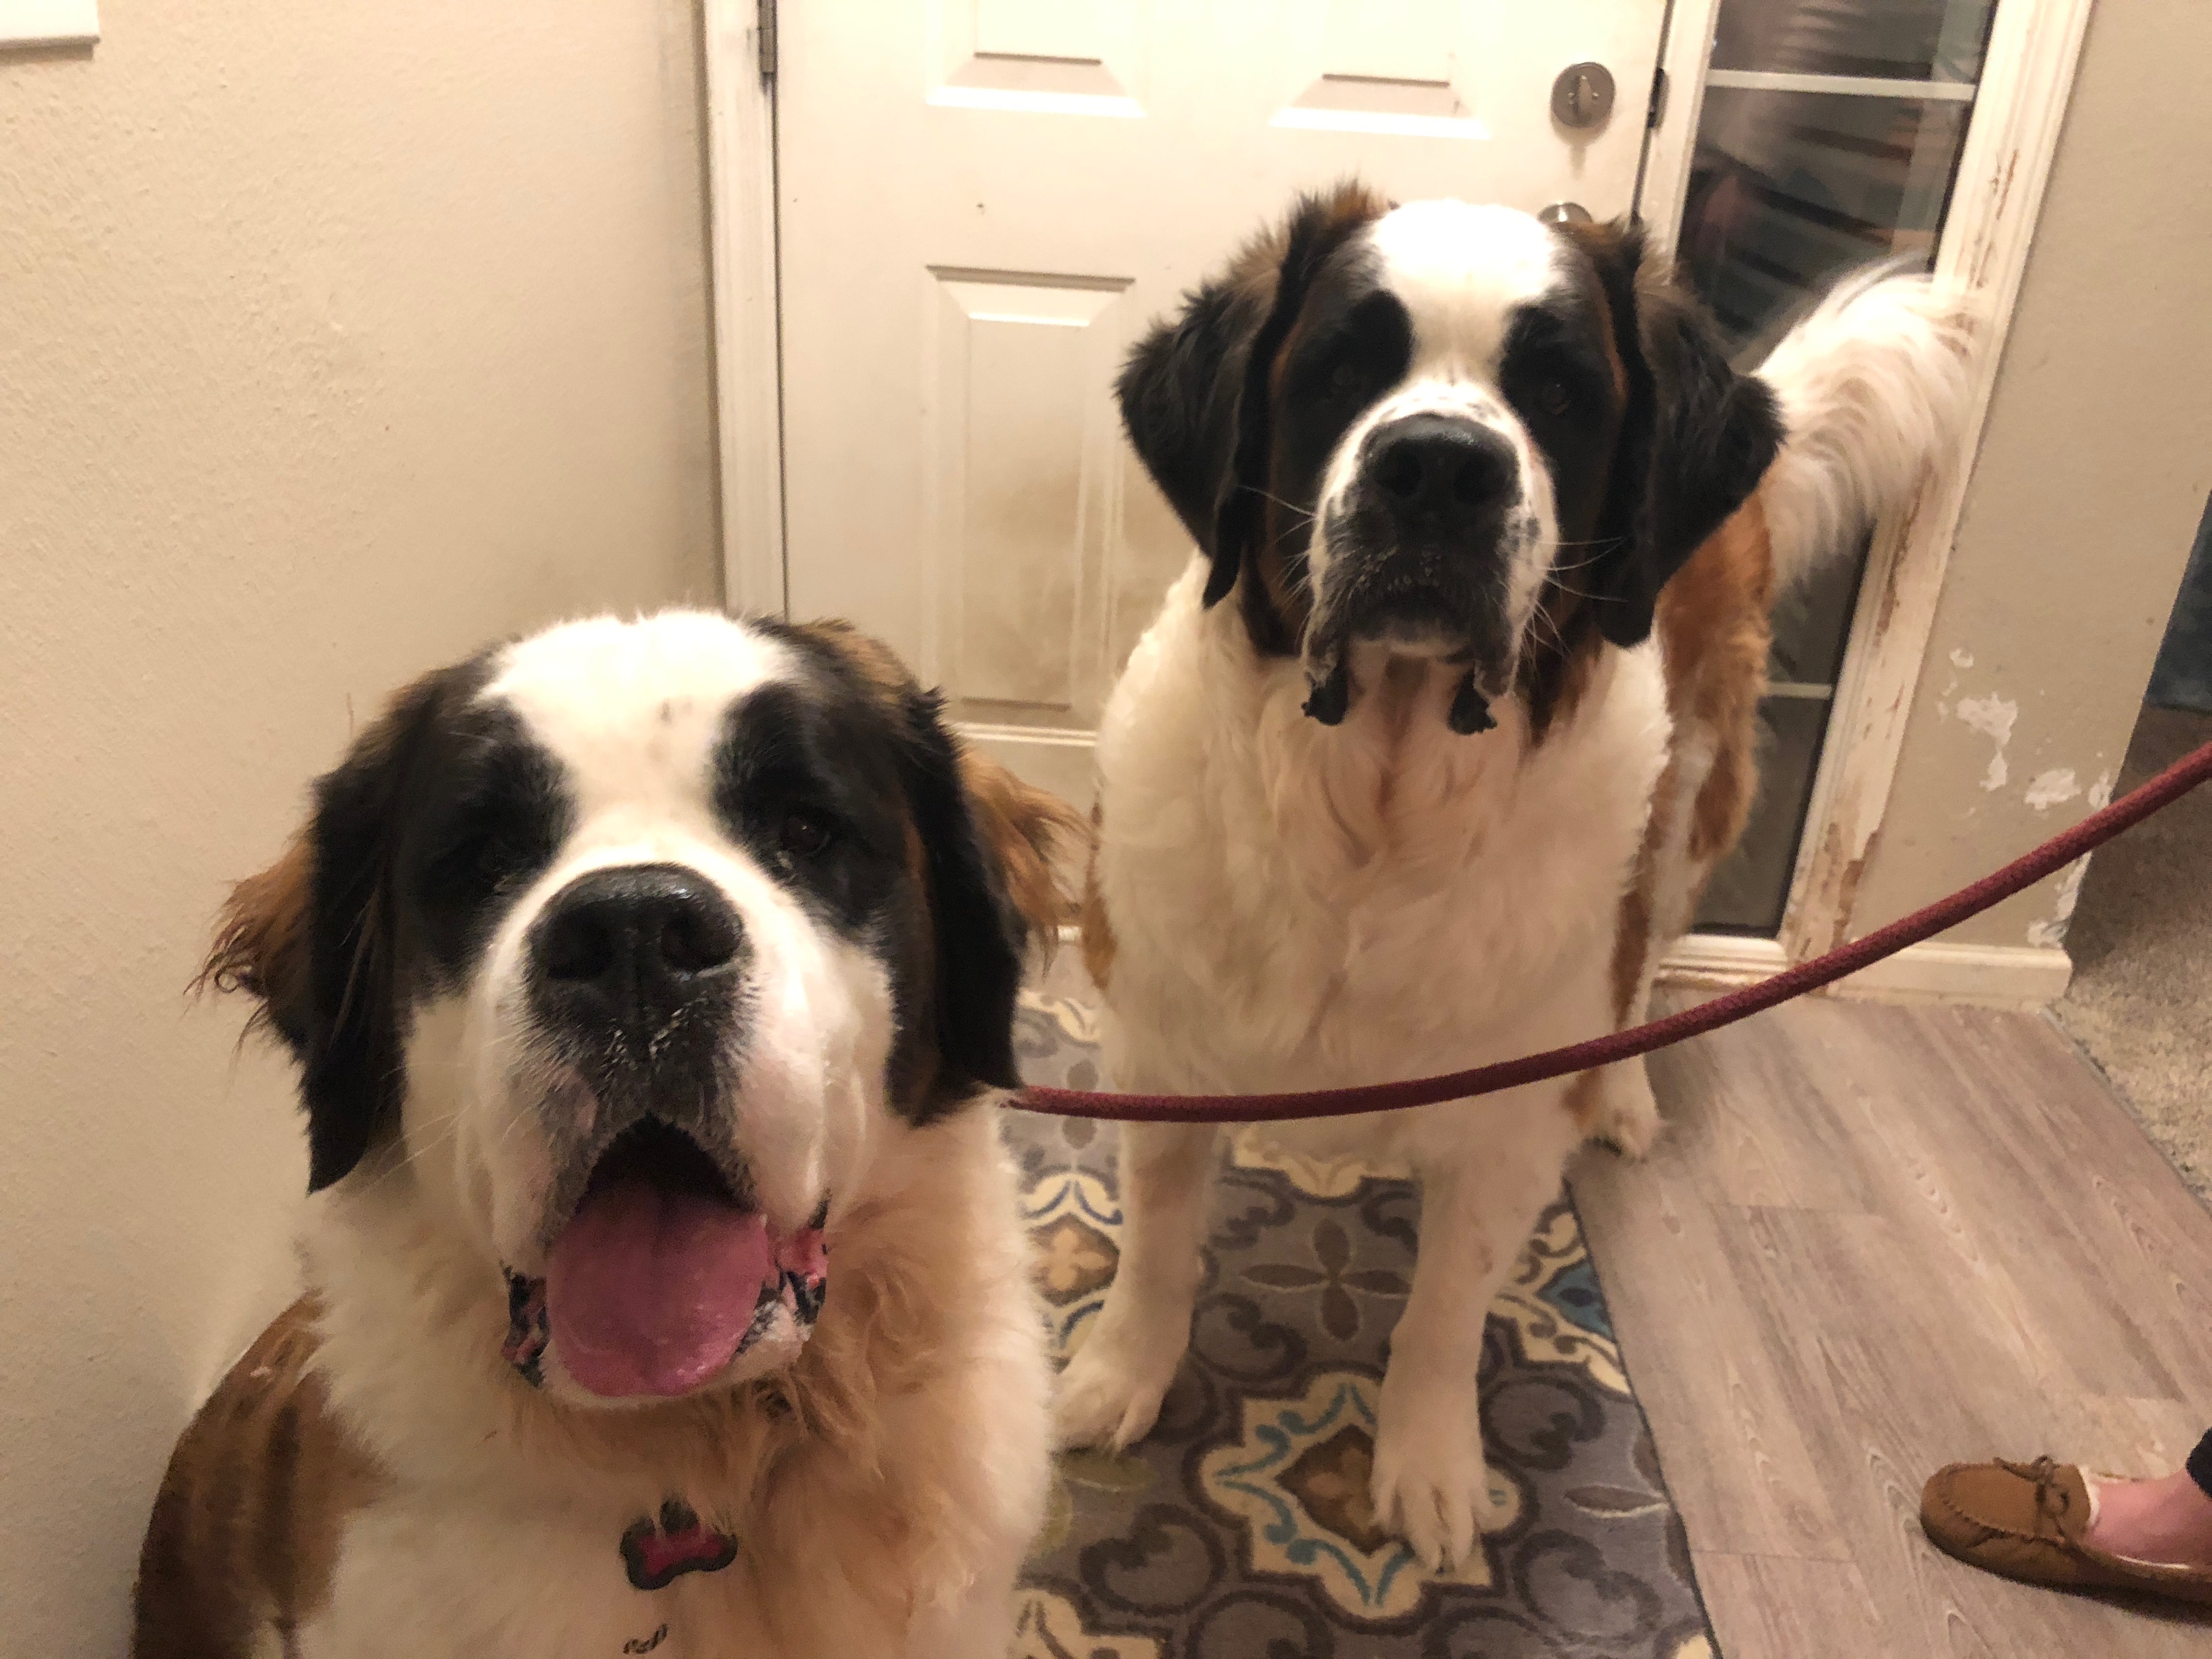 TankPhoebe - Using Counterconditioning to Train a Saint Bernard to Accept New People into the Home